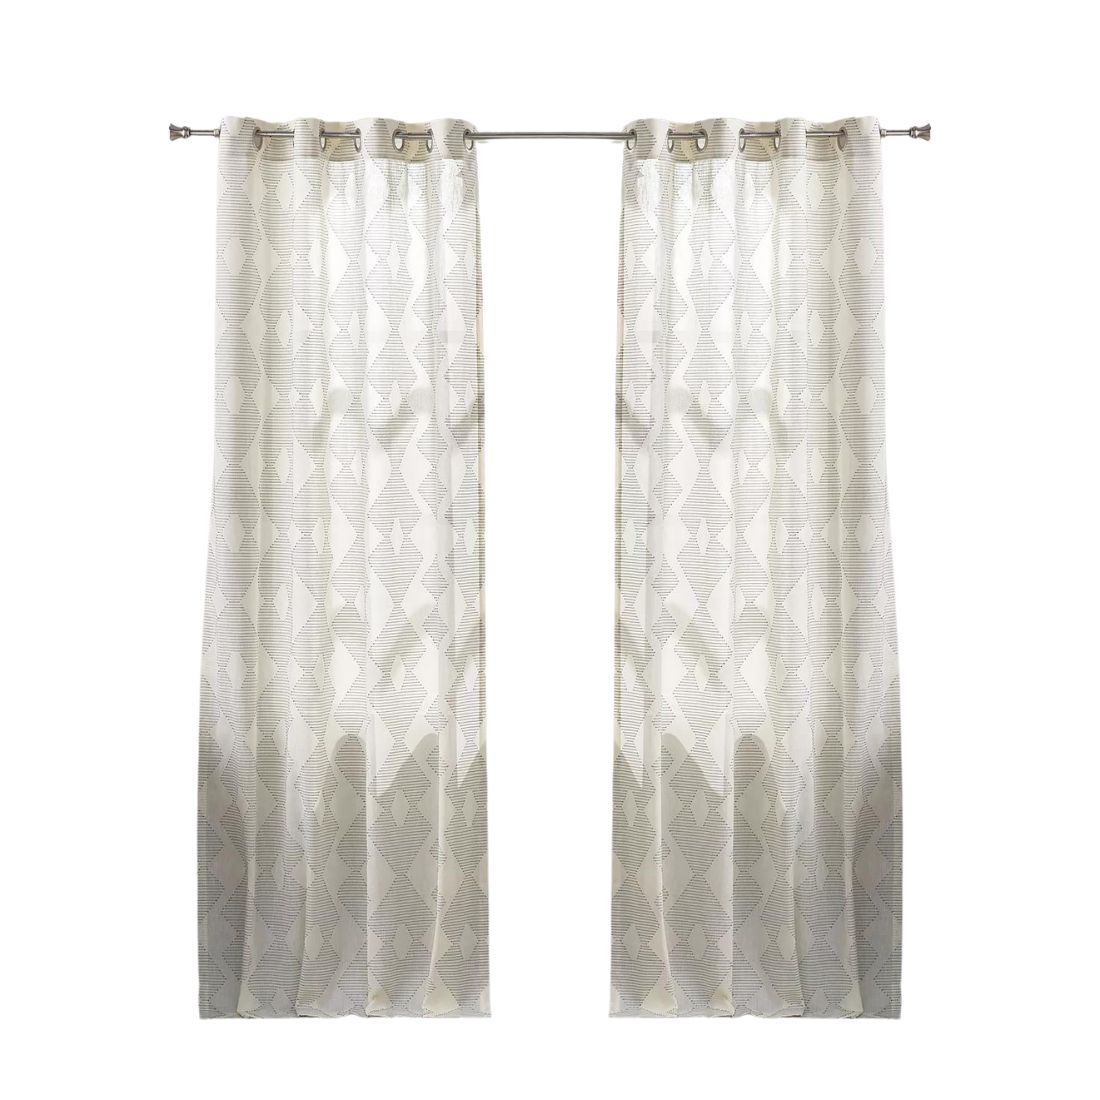 Pair of Off White Linen Curtains With Geometric Threads